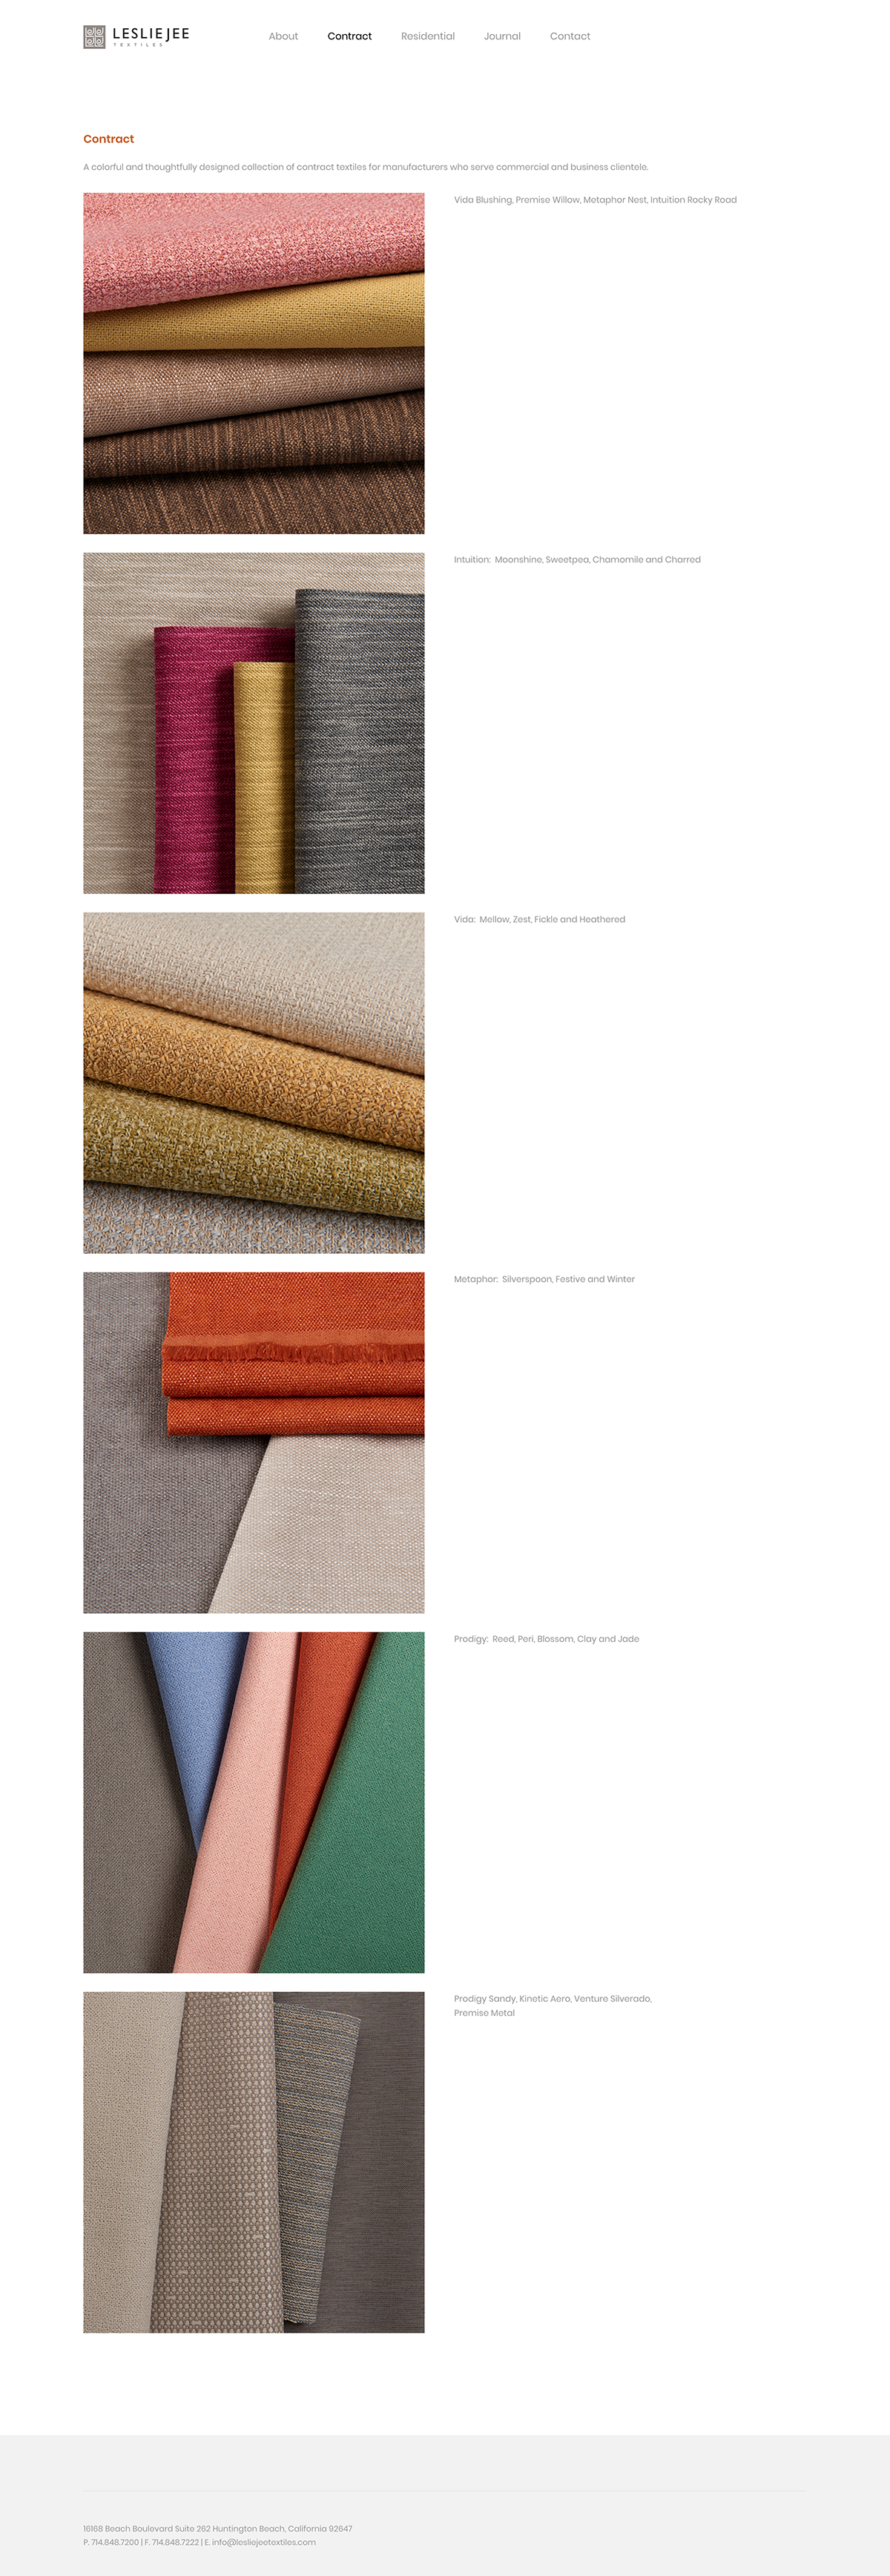 Leslie Jee Textiles Contract Page